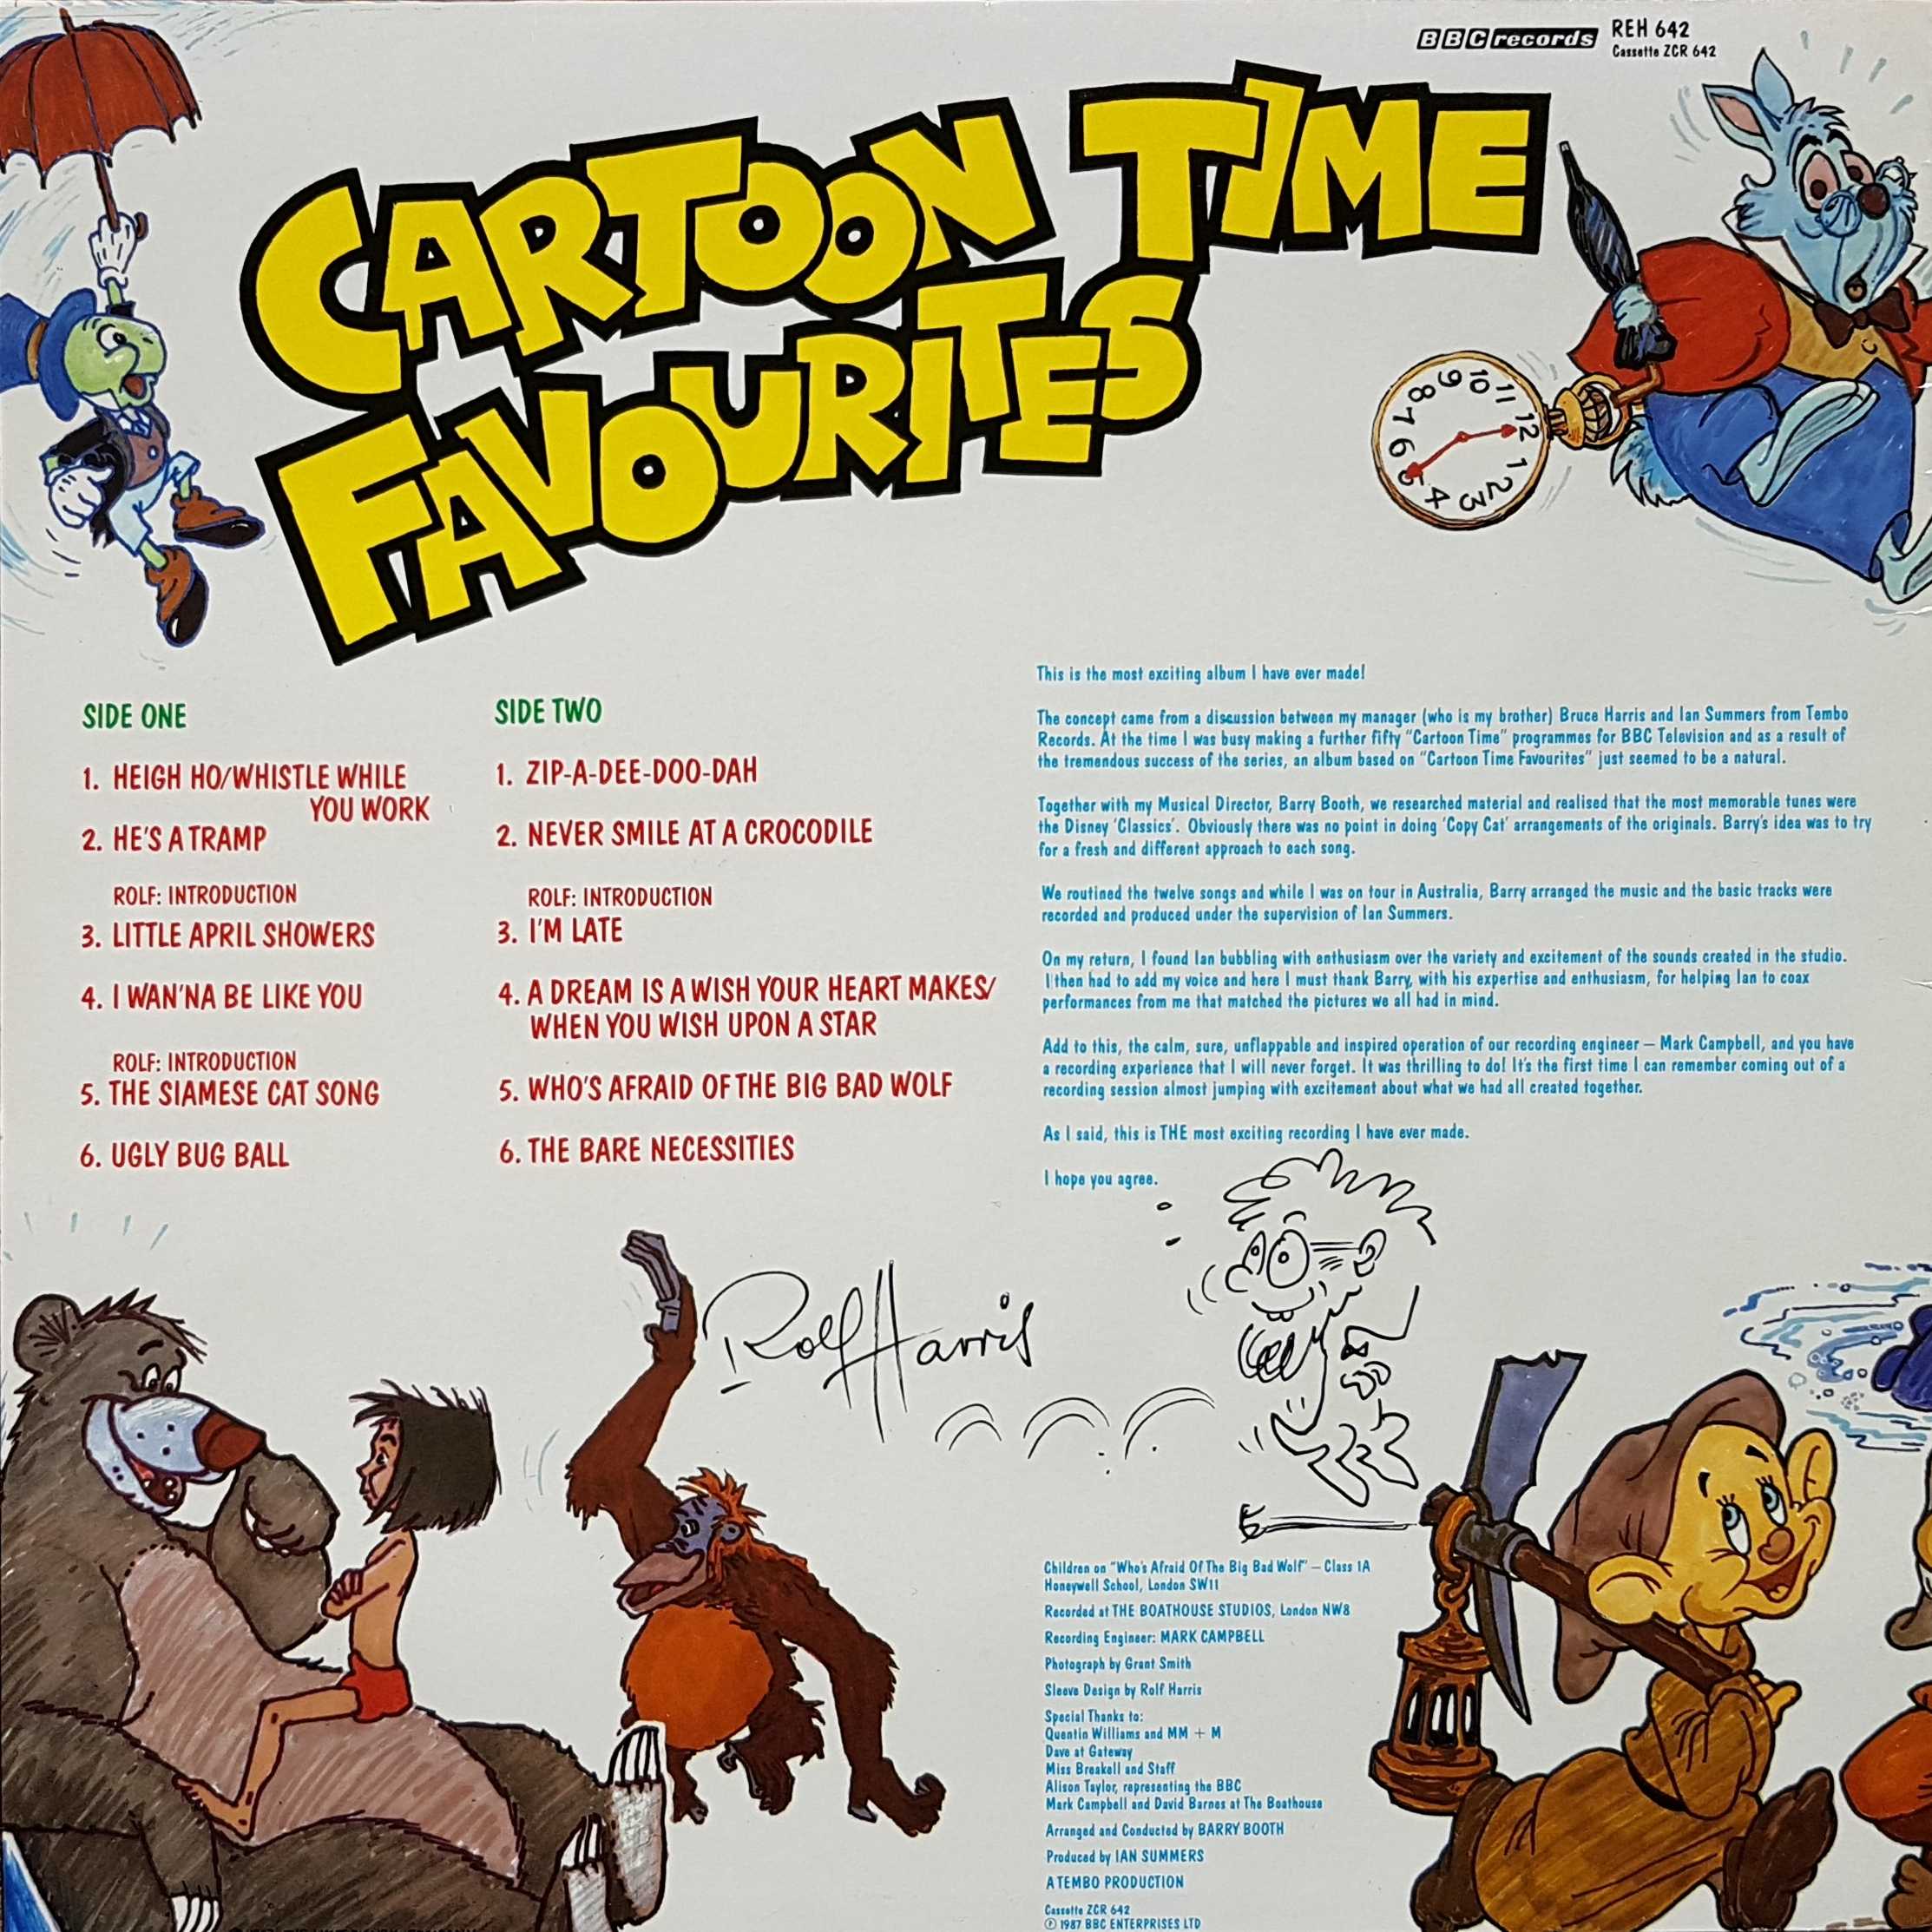 Picture of REH 642 Cartoon time favourites by artist Rolf Harris from the BBC records and Tapes library